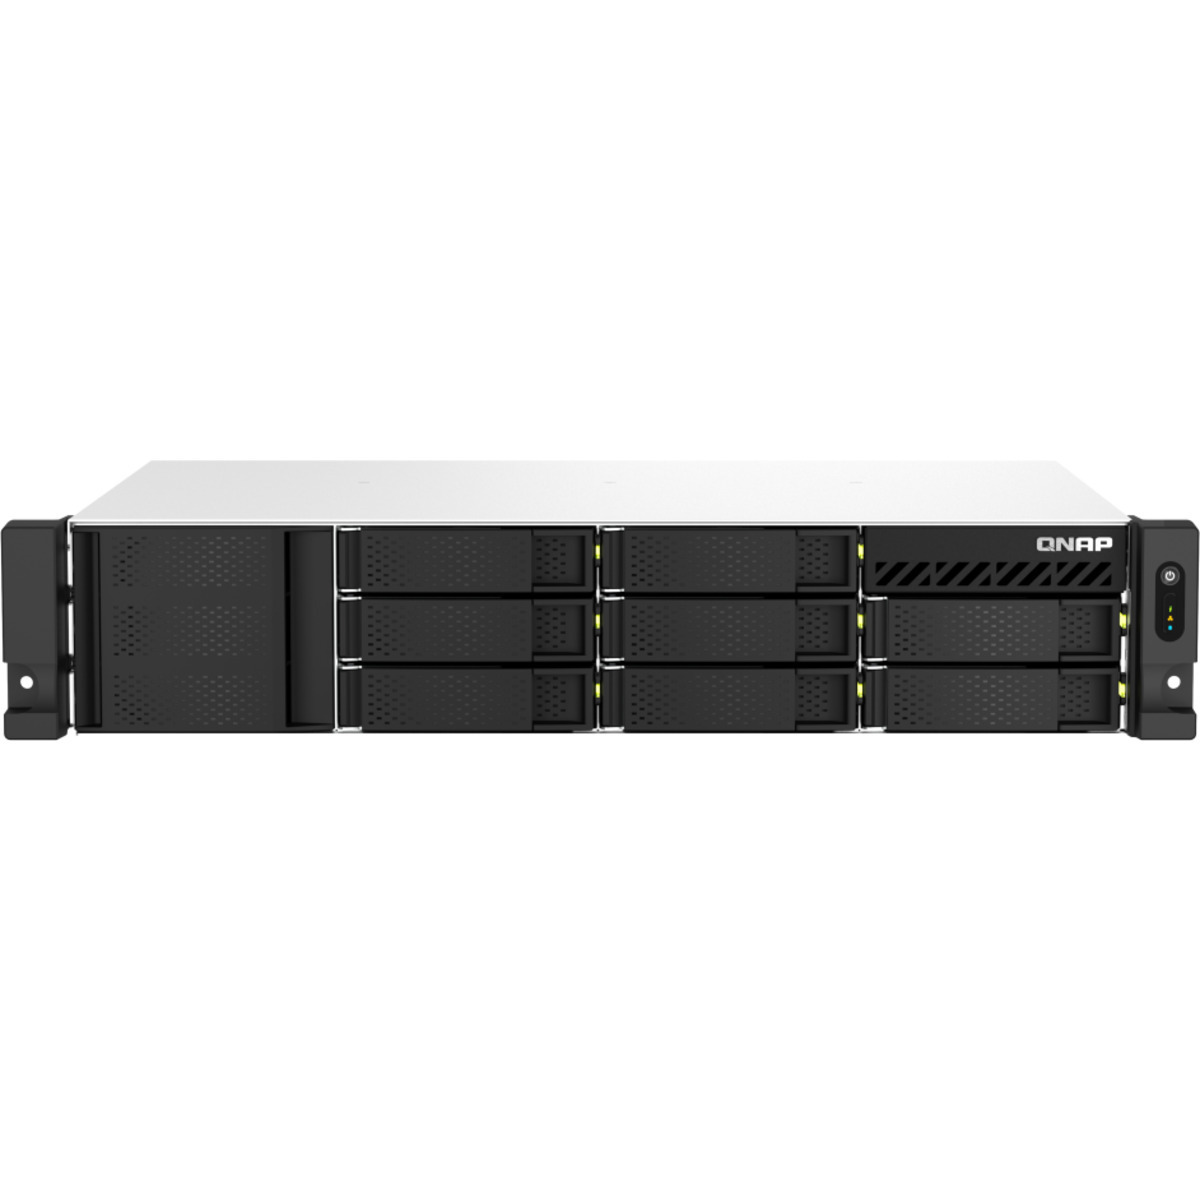 QNAP TS-873AeU 132tb 8-Bay RackMount Multimedia / Power User / Business NAS - Network Attached Storage Device 6x22tb Western Digital Ultrastar HC580 SED WUH722422ALE6L1 3.5 7200rpm SATA 6Gb/s HDD ENTERPRISE Class Drives Installed - Burn-In Tested - FREE RAM UPGRADE TS-873AeU